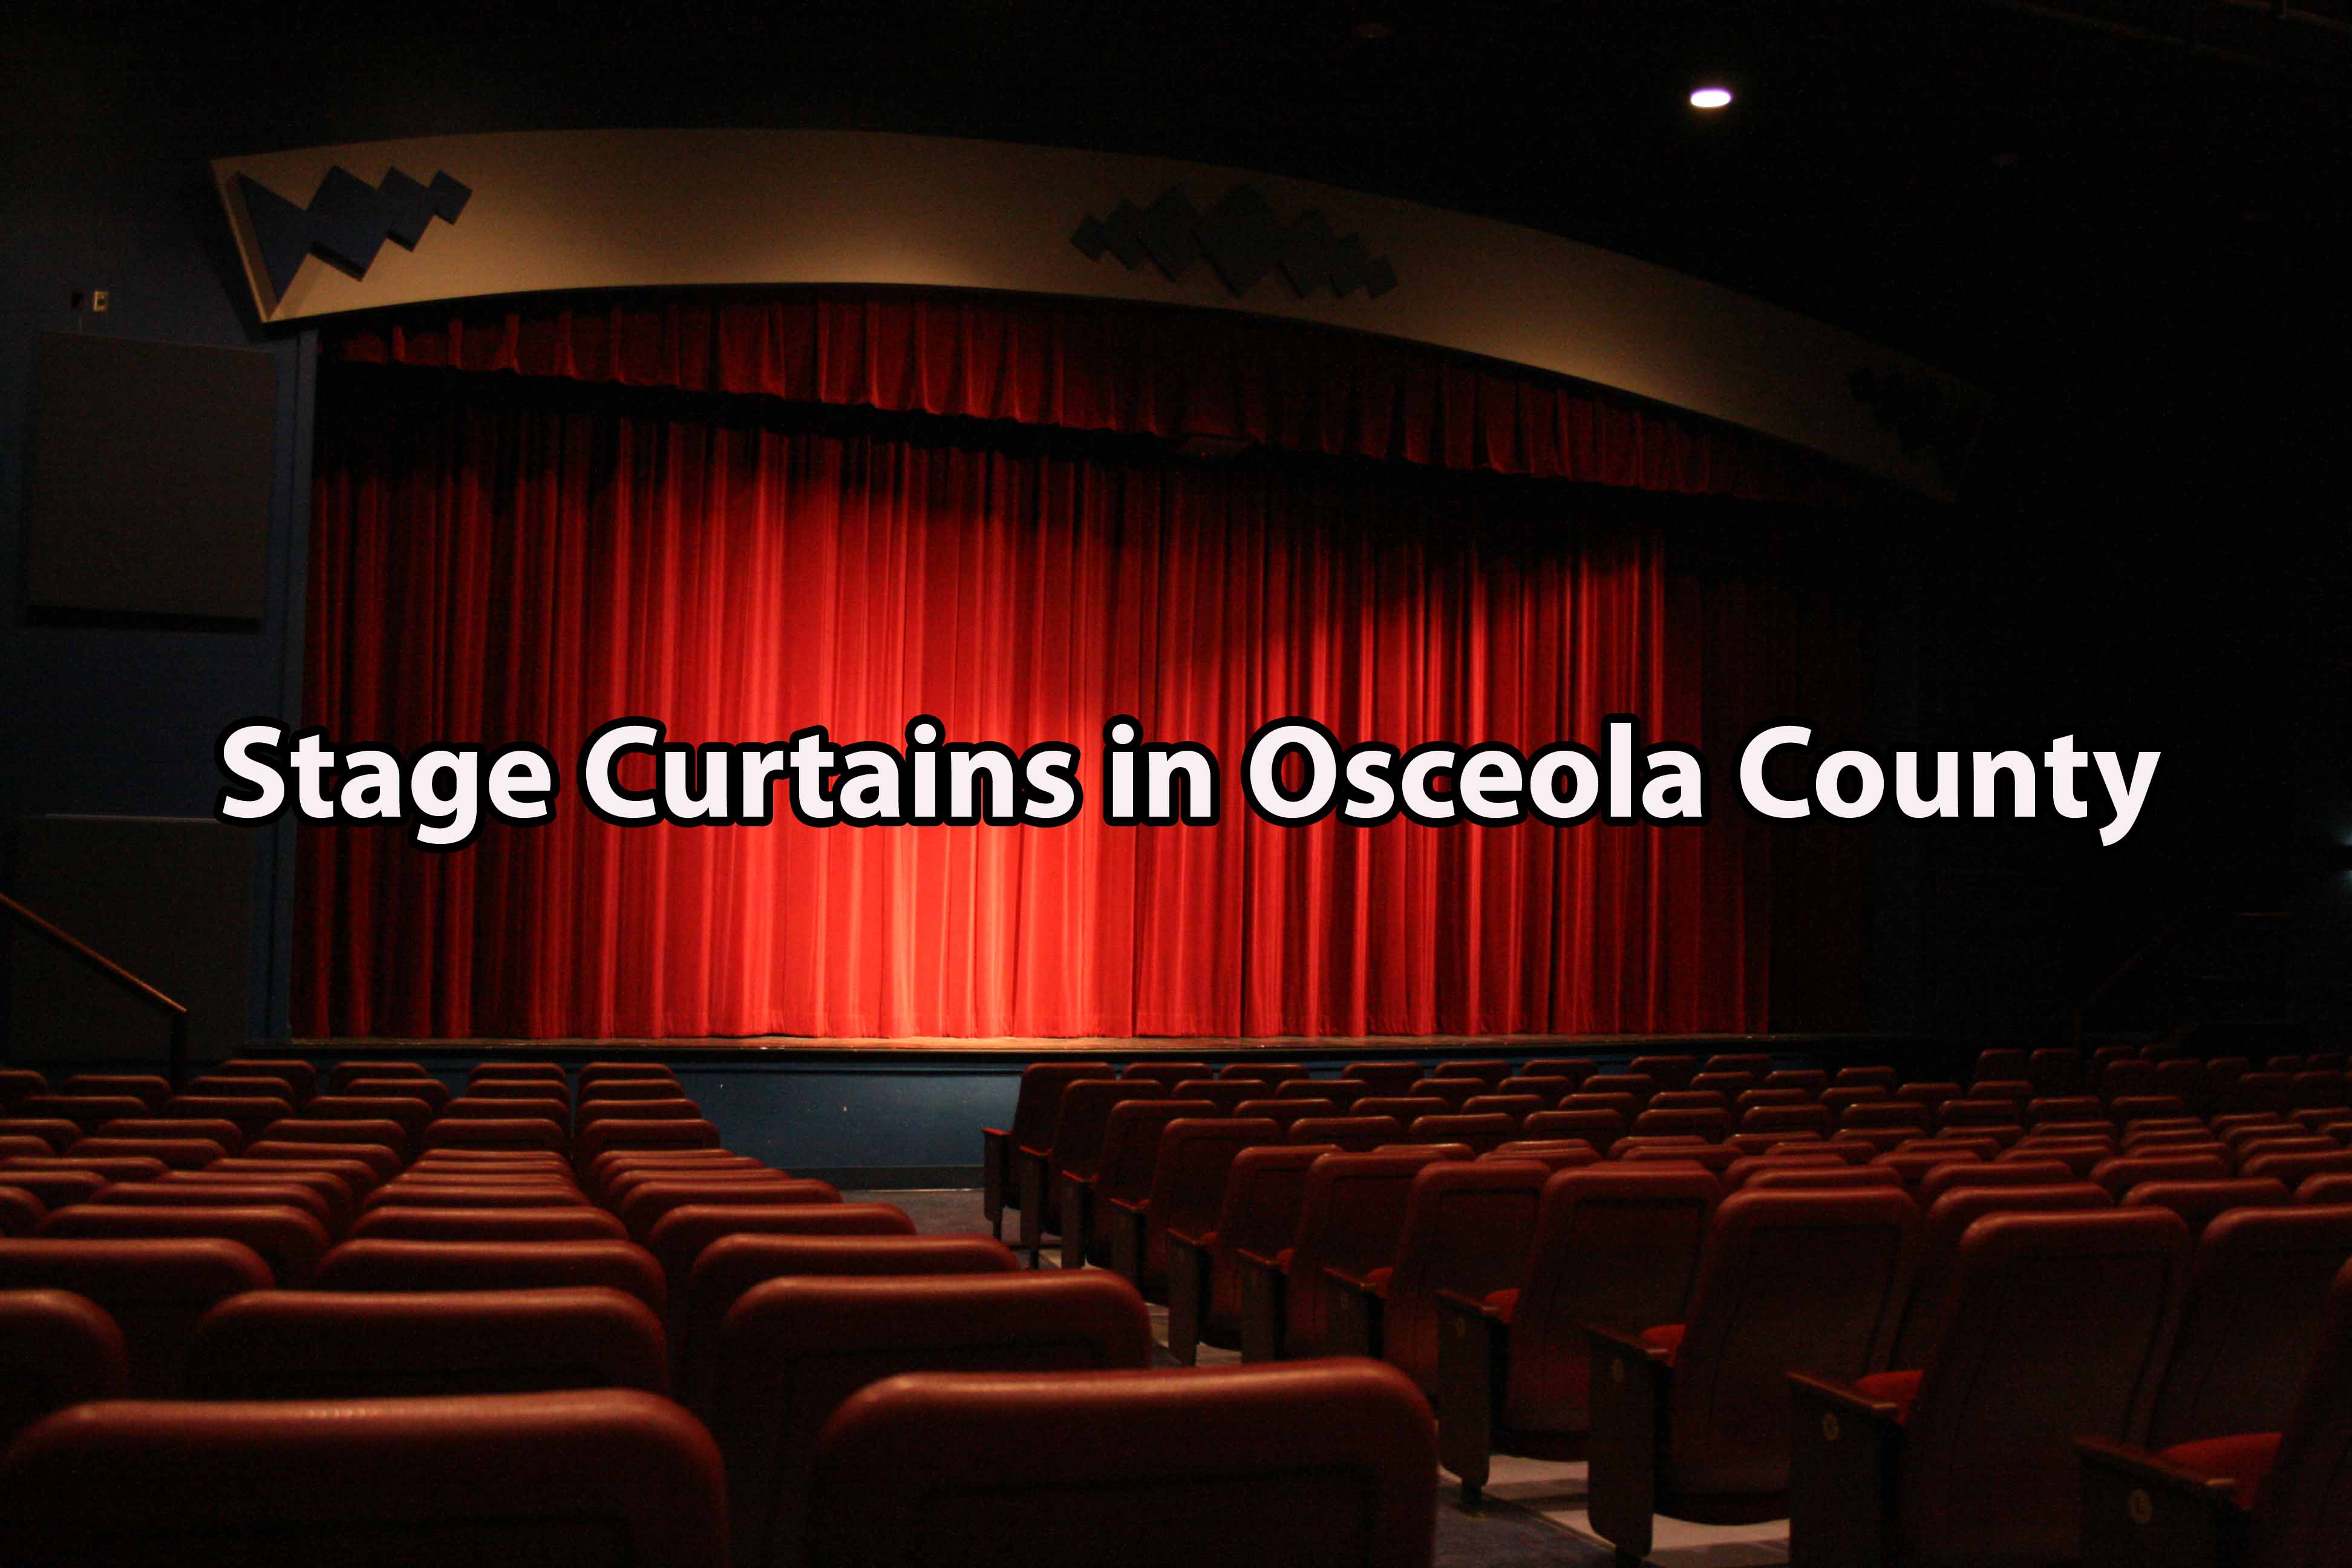 Stage Curtains in Osceola County